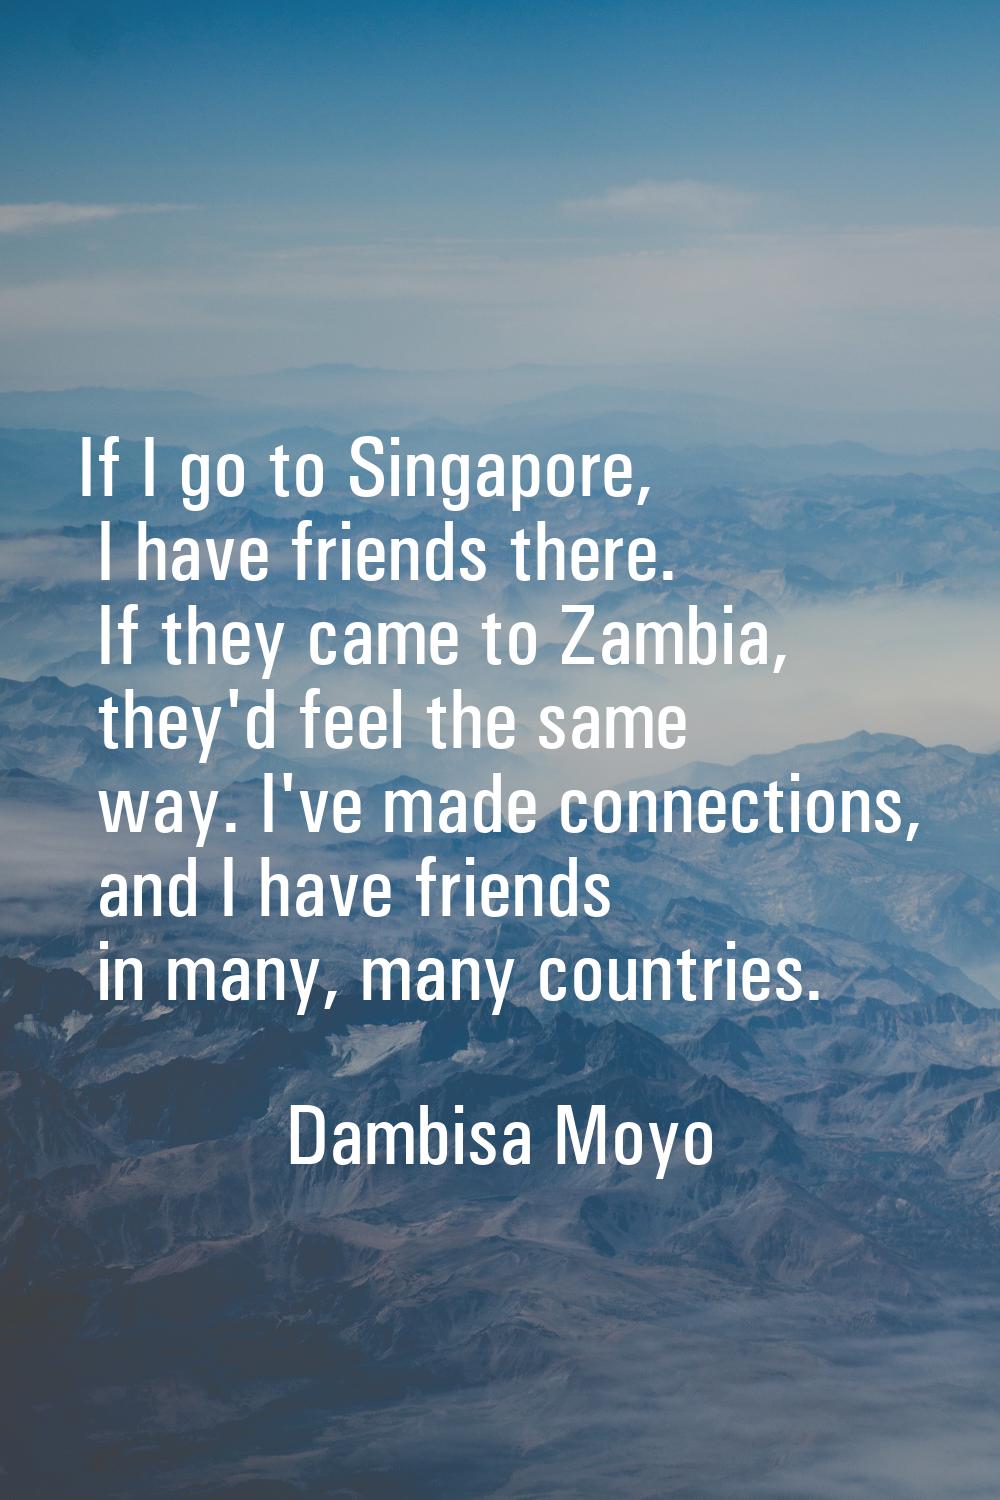 If I go to Singapore, I have friends there. If they came to Zambia, they'd feel the same way. I've 